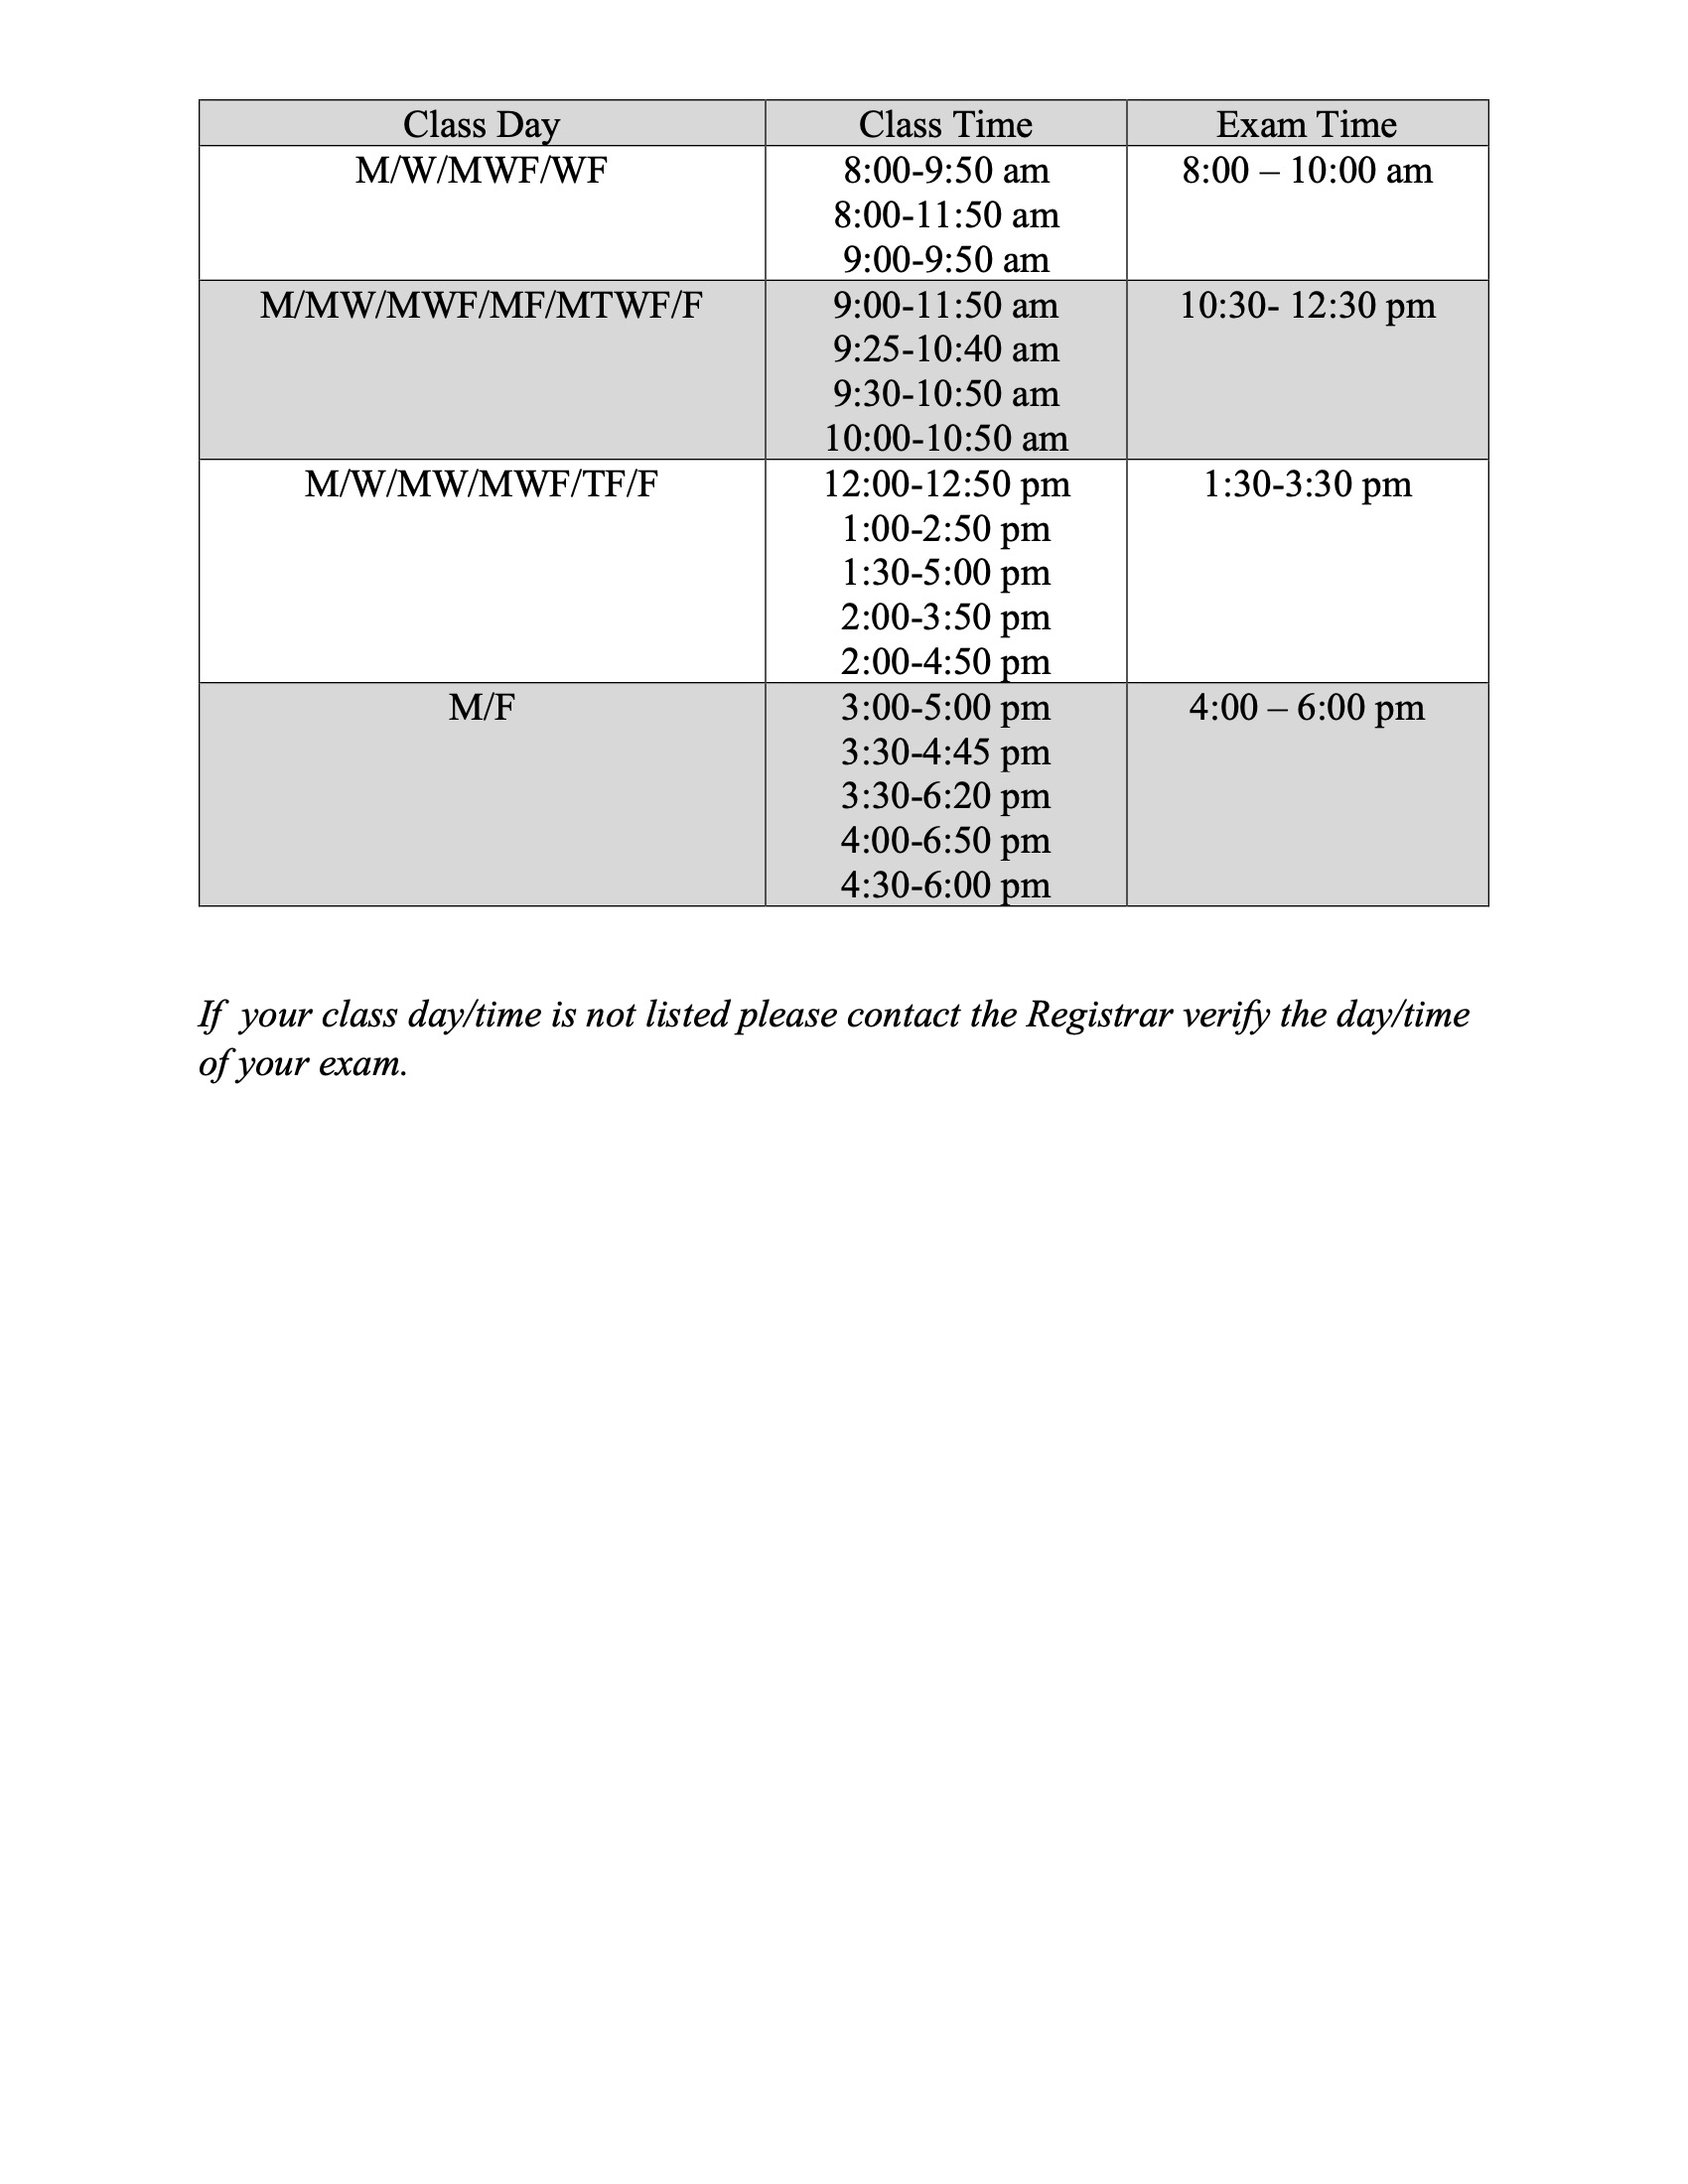 Class Day
Class Time
Exam Time
M/W/MWF/WF
8:00-9:50 am 8:00-11:50 am 9:00-9:50 am
8:00 – 10:00 am
M/MW/MWF/MF/MTWF/F
9:00-11:50 am 9:25-10:40 am 9:30-10:50 am 10:00-10:50 am
10:30- 12:30 pm
M/W/MW/MWF/TF/F
12:00-12:50 pm 1:00-2:50 pm 1:30-5:00 pm 2:00-3:50 pm 2:00-4:50 pm
1:30-3:30 pm
M/F
3:00-5:00 pm 3:30-4:45 pm 3:30-6:20 pm 4:00-6:50 pm 4:30-6:00 pm
4:00 – 6:00 pm
If your class day/time is not listed please contact the Registrar verify the day/time of your exam.